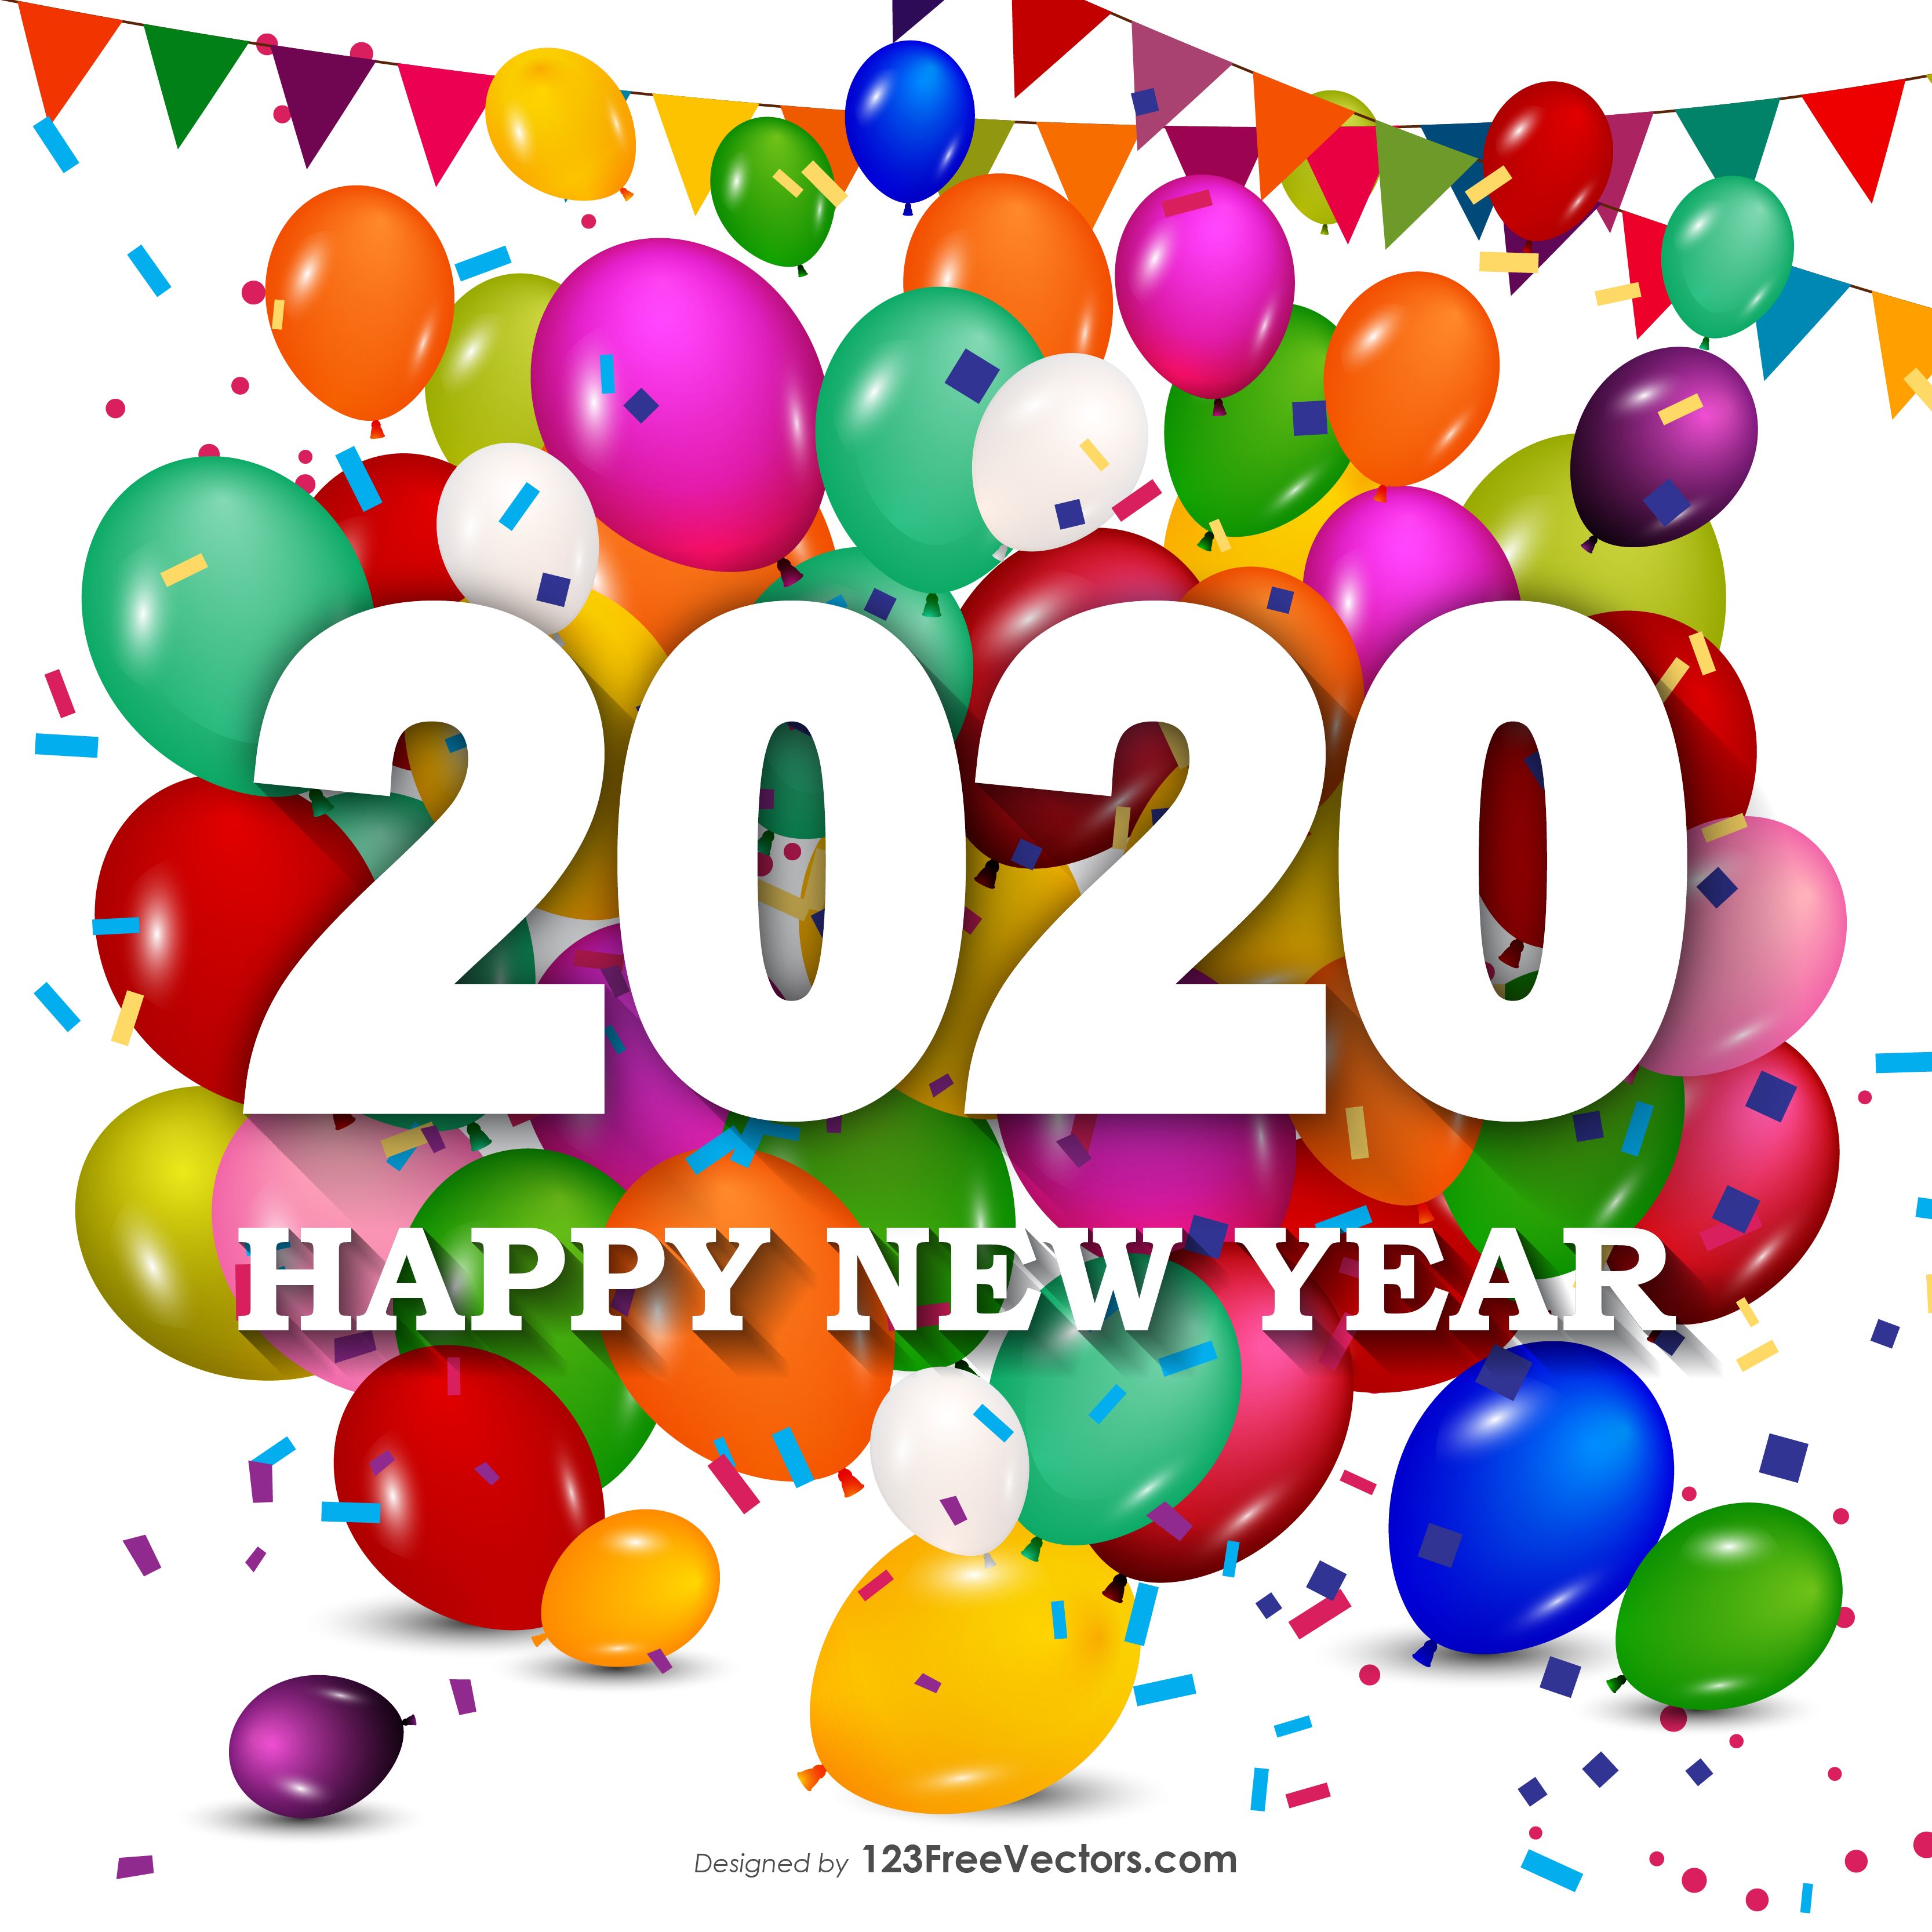 What Are Some Images Of Happy New Year 2020 Quora